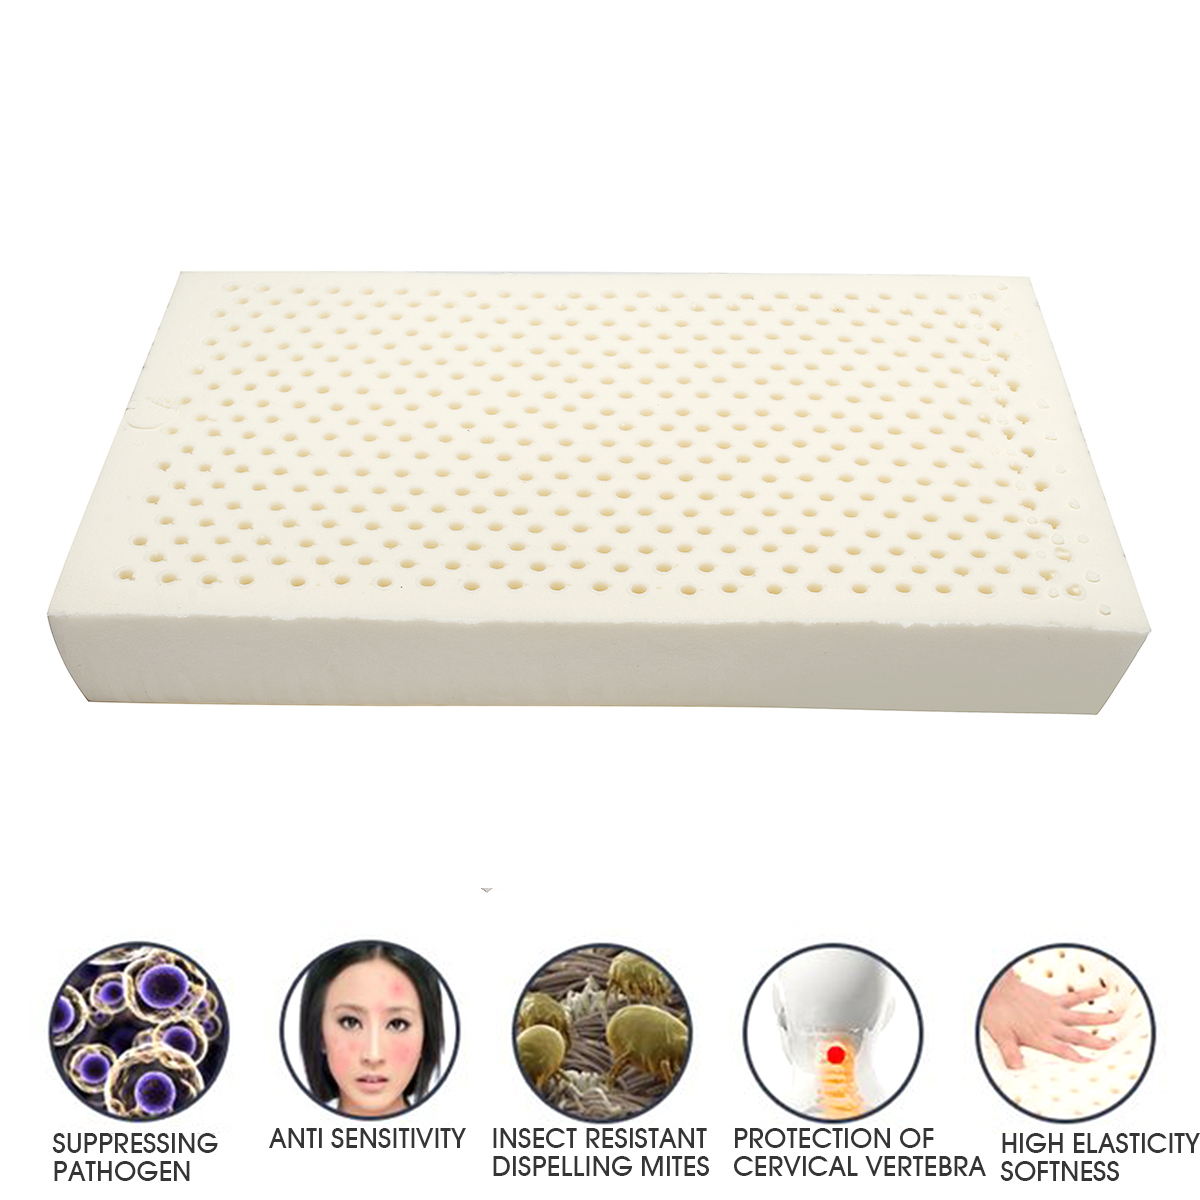 100-Natural-Standard-Latex-Pillow-Comfort-for-Neck-Pain-Fatigue-Relief-1370339